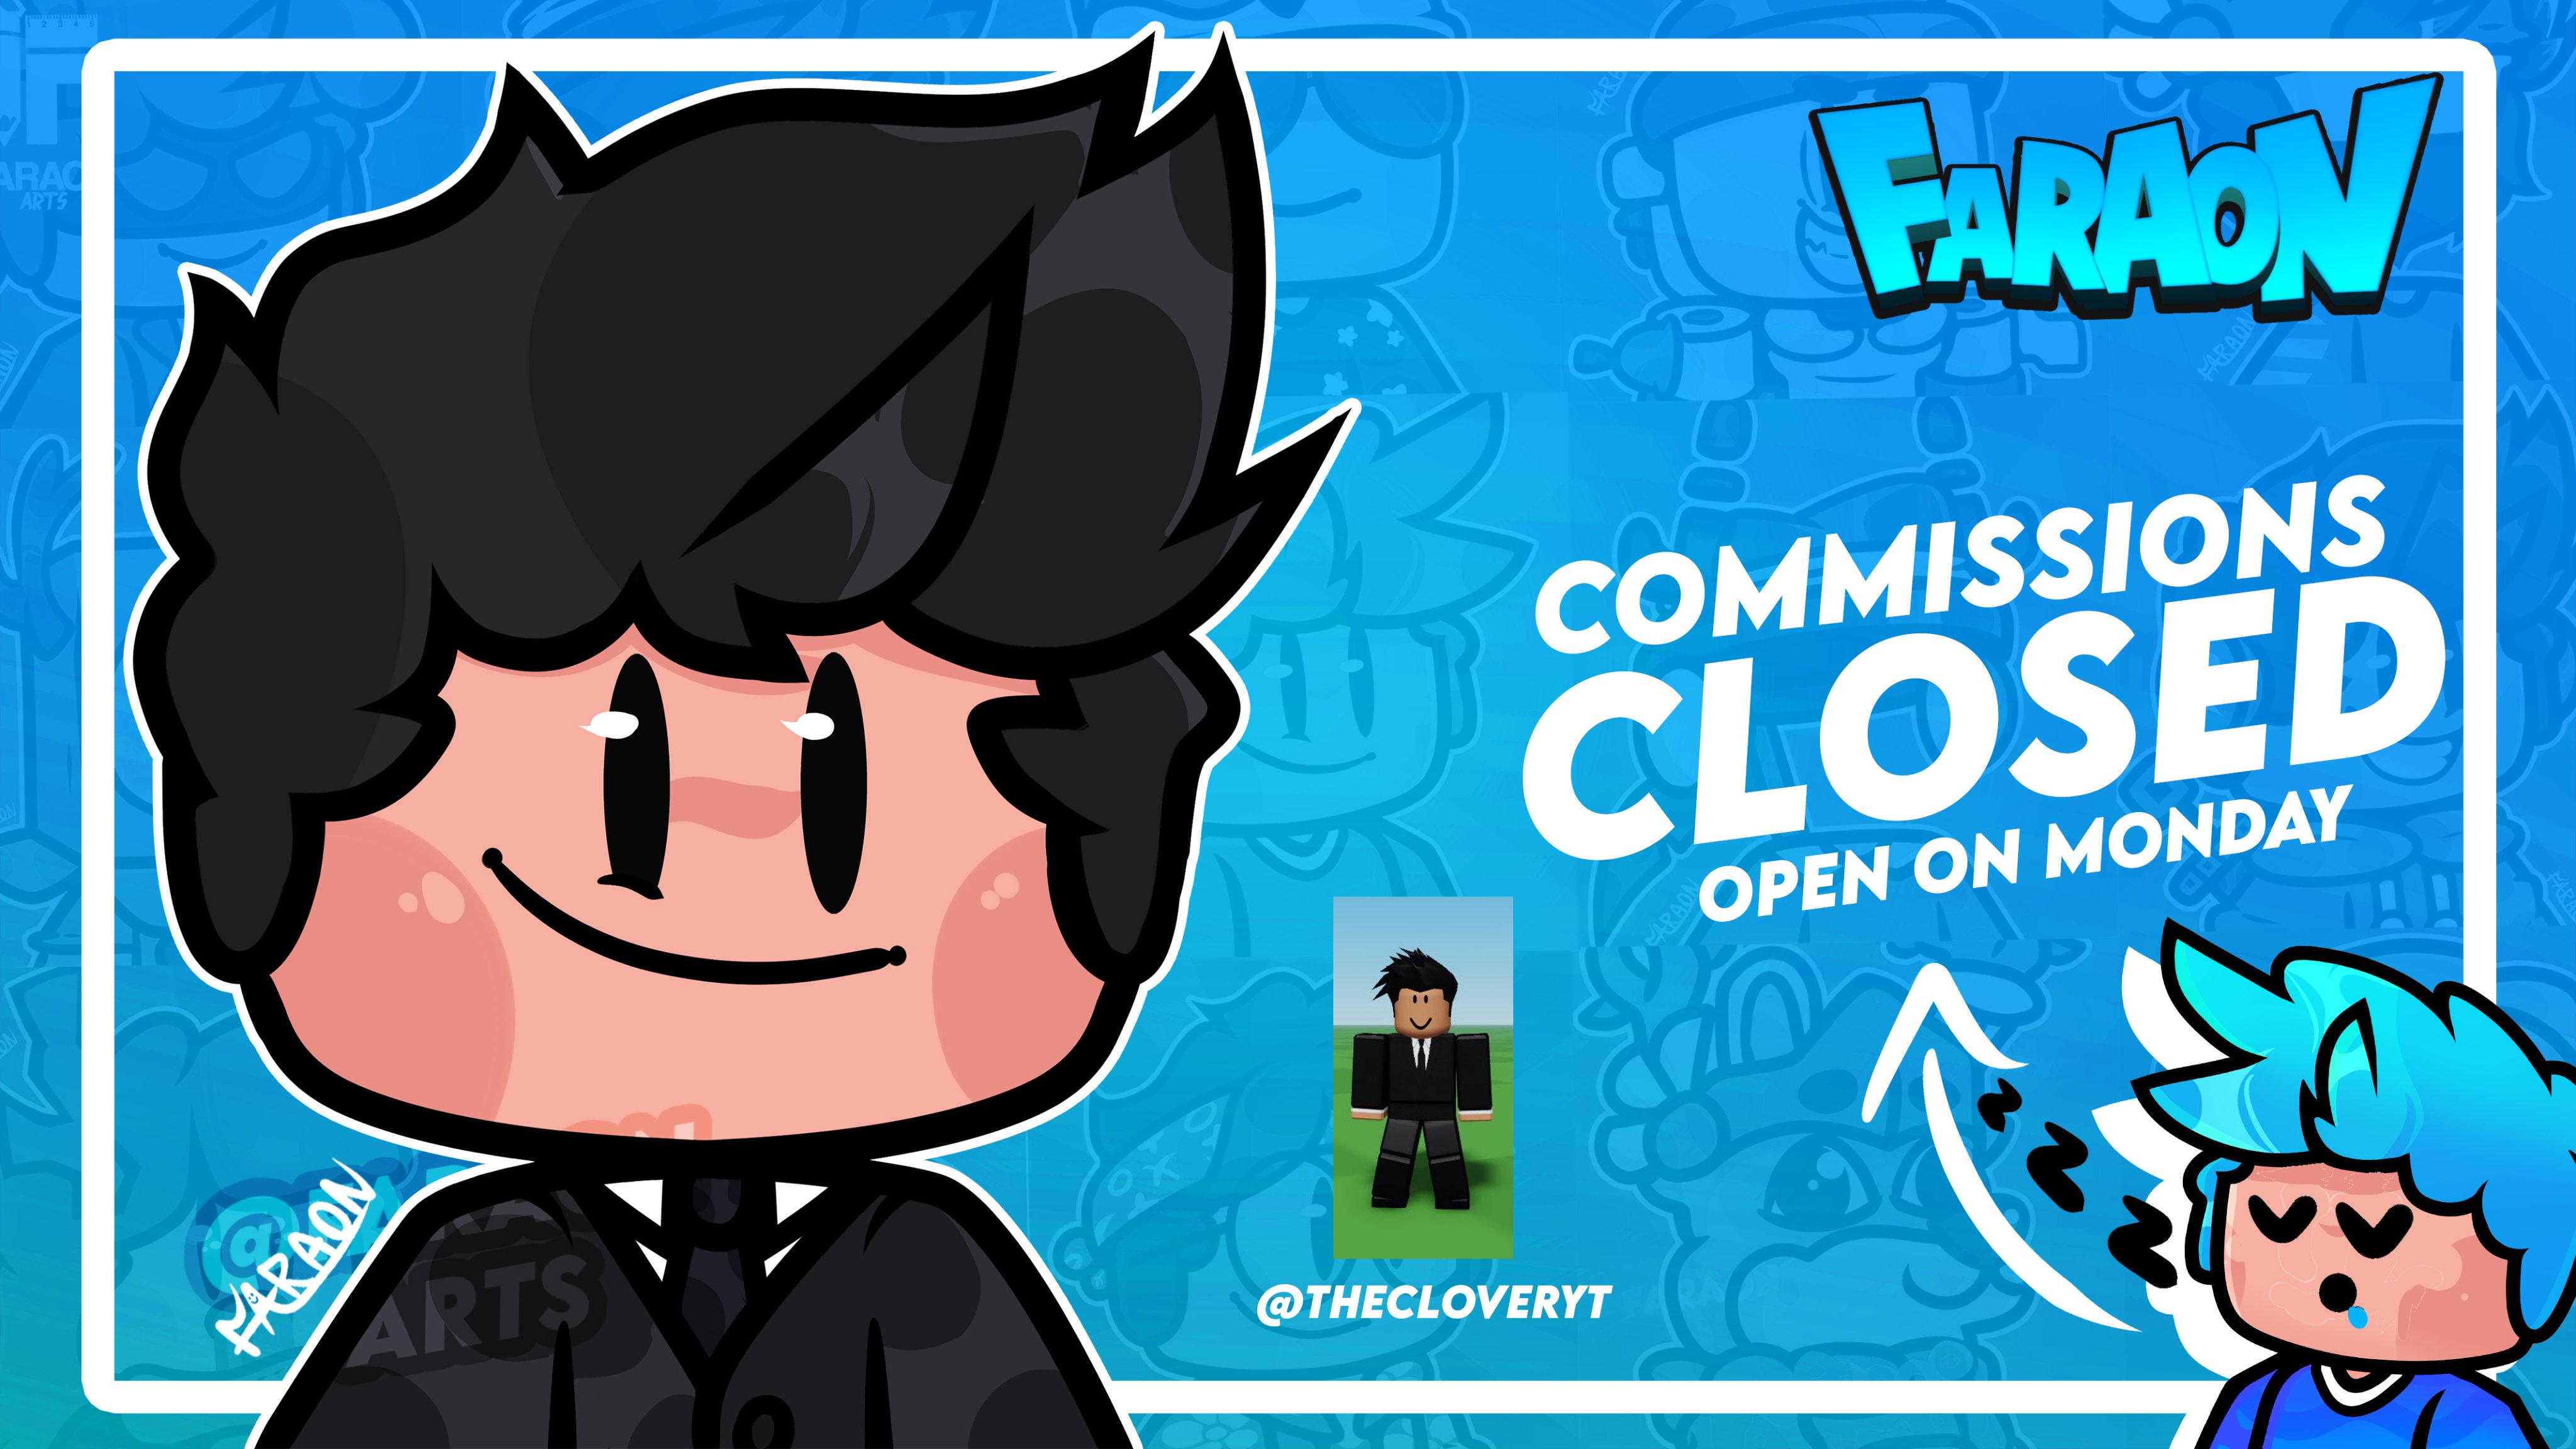 FaraonArts™️ (Commissions CLOSED) on X: Roblox Vector icons Commission!😍  Likes ♥️ and Retweets🔁are Appreciated! #Roblox #RBXDev #RobloxDev  #RobloxArt  / X